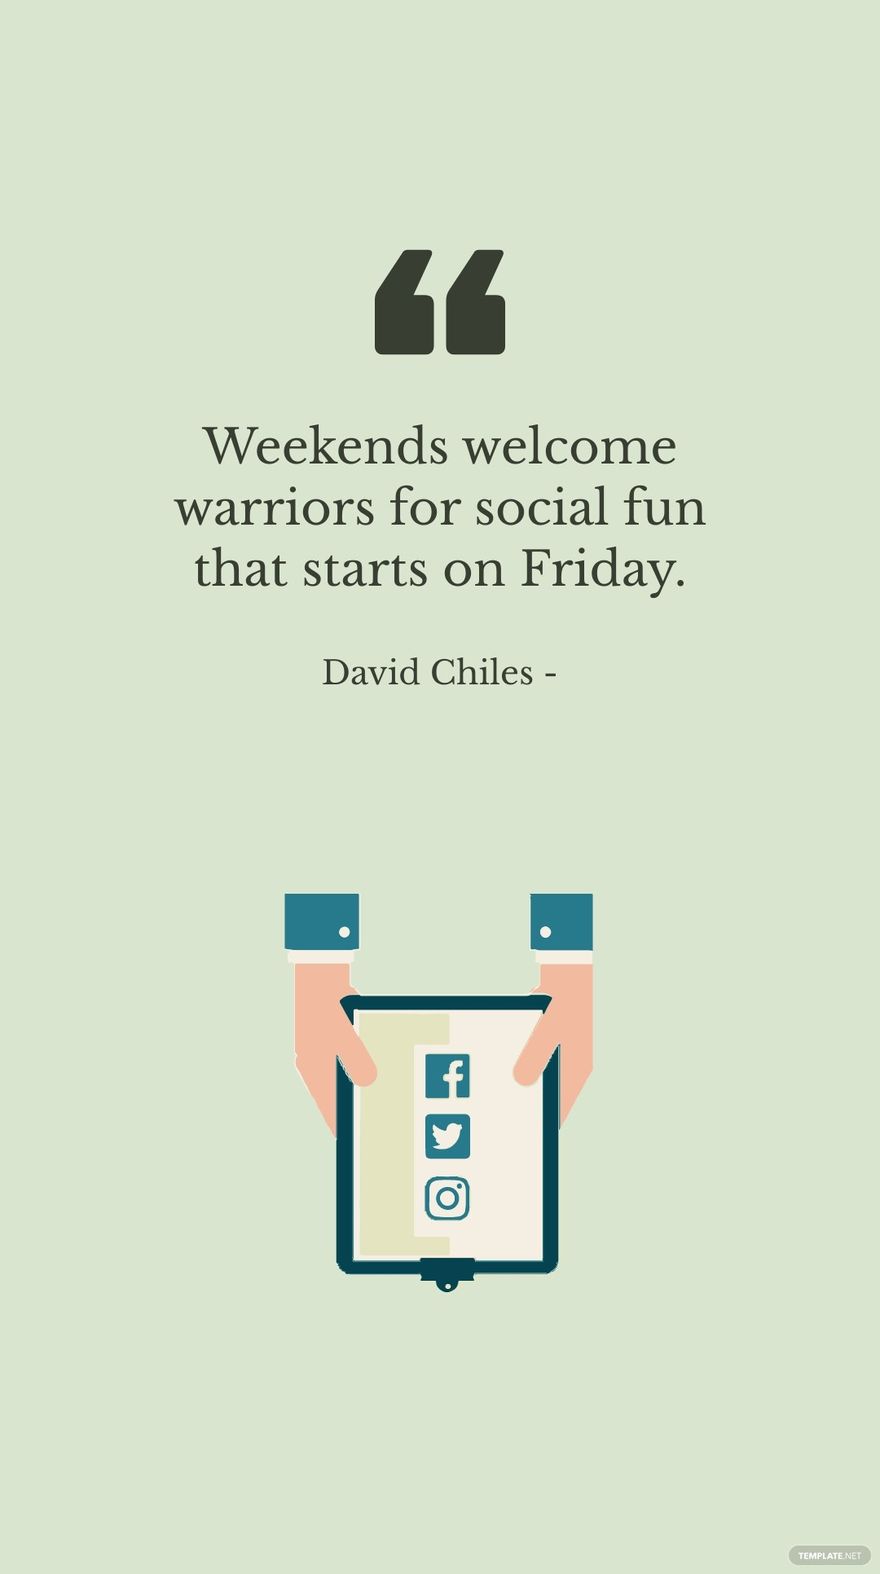 David Chiles - Weekends welcome warriors for social fun that starts on Friday.